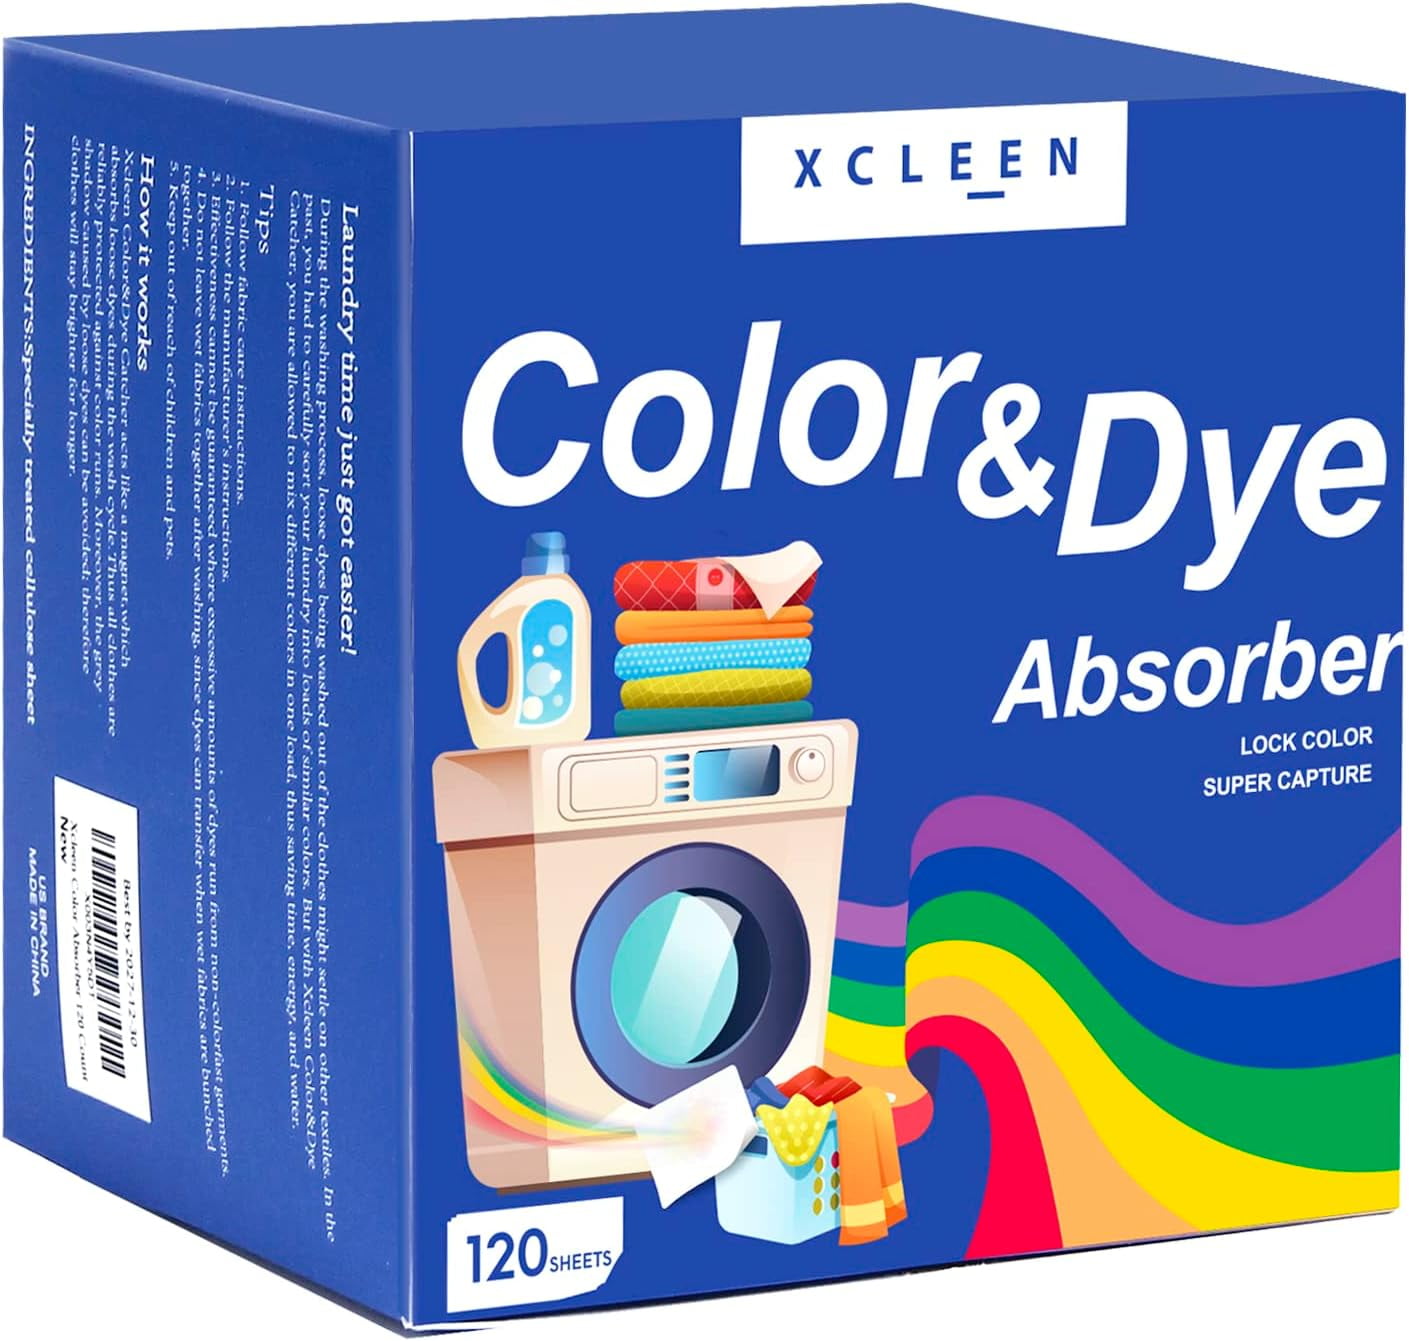 Color Absorbing Paper, Color Catcher Sheets For Laundry, Anti-dyeing Laundry  Washing Sheets, Allow Mixed Washes, Prevent Color Runs, And Maintain  Original Color Of Clothing, Cleaning Supplies, Cleaning Tool, Ready For  School 